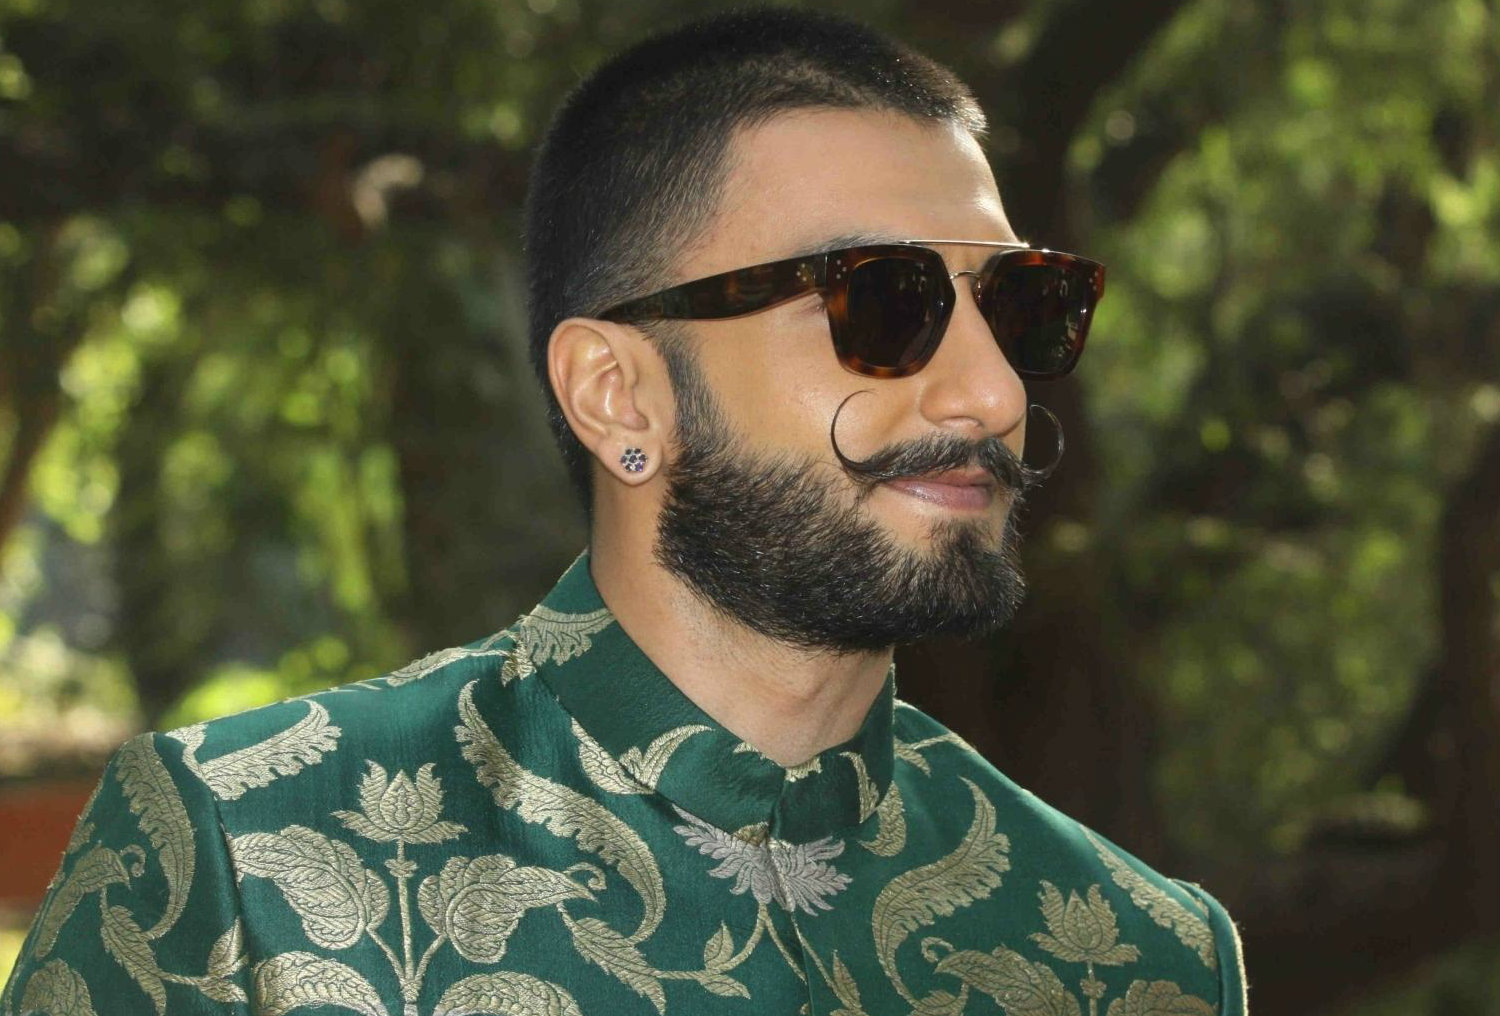 'Some highs, some lows, that's sport,' says Ranveer Singh after WC match